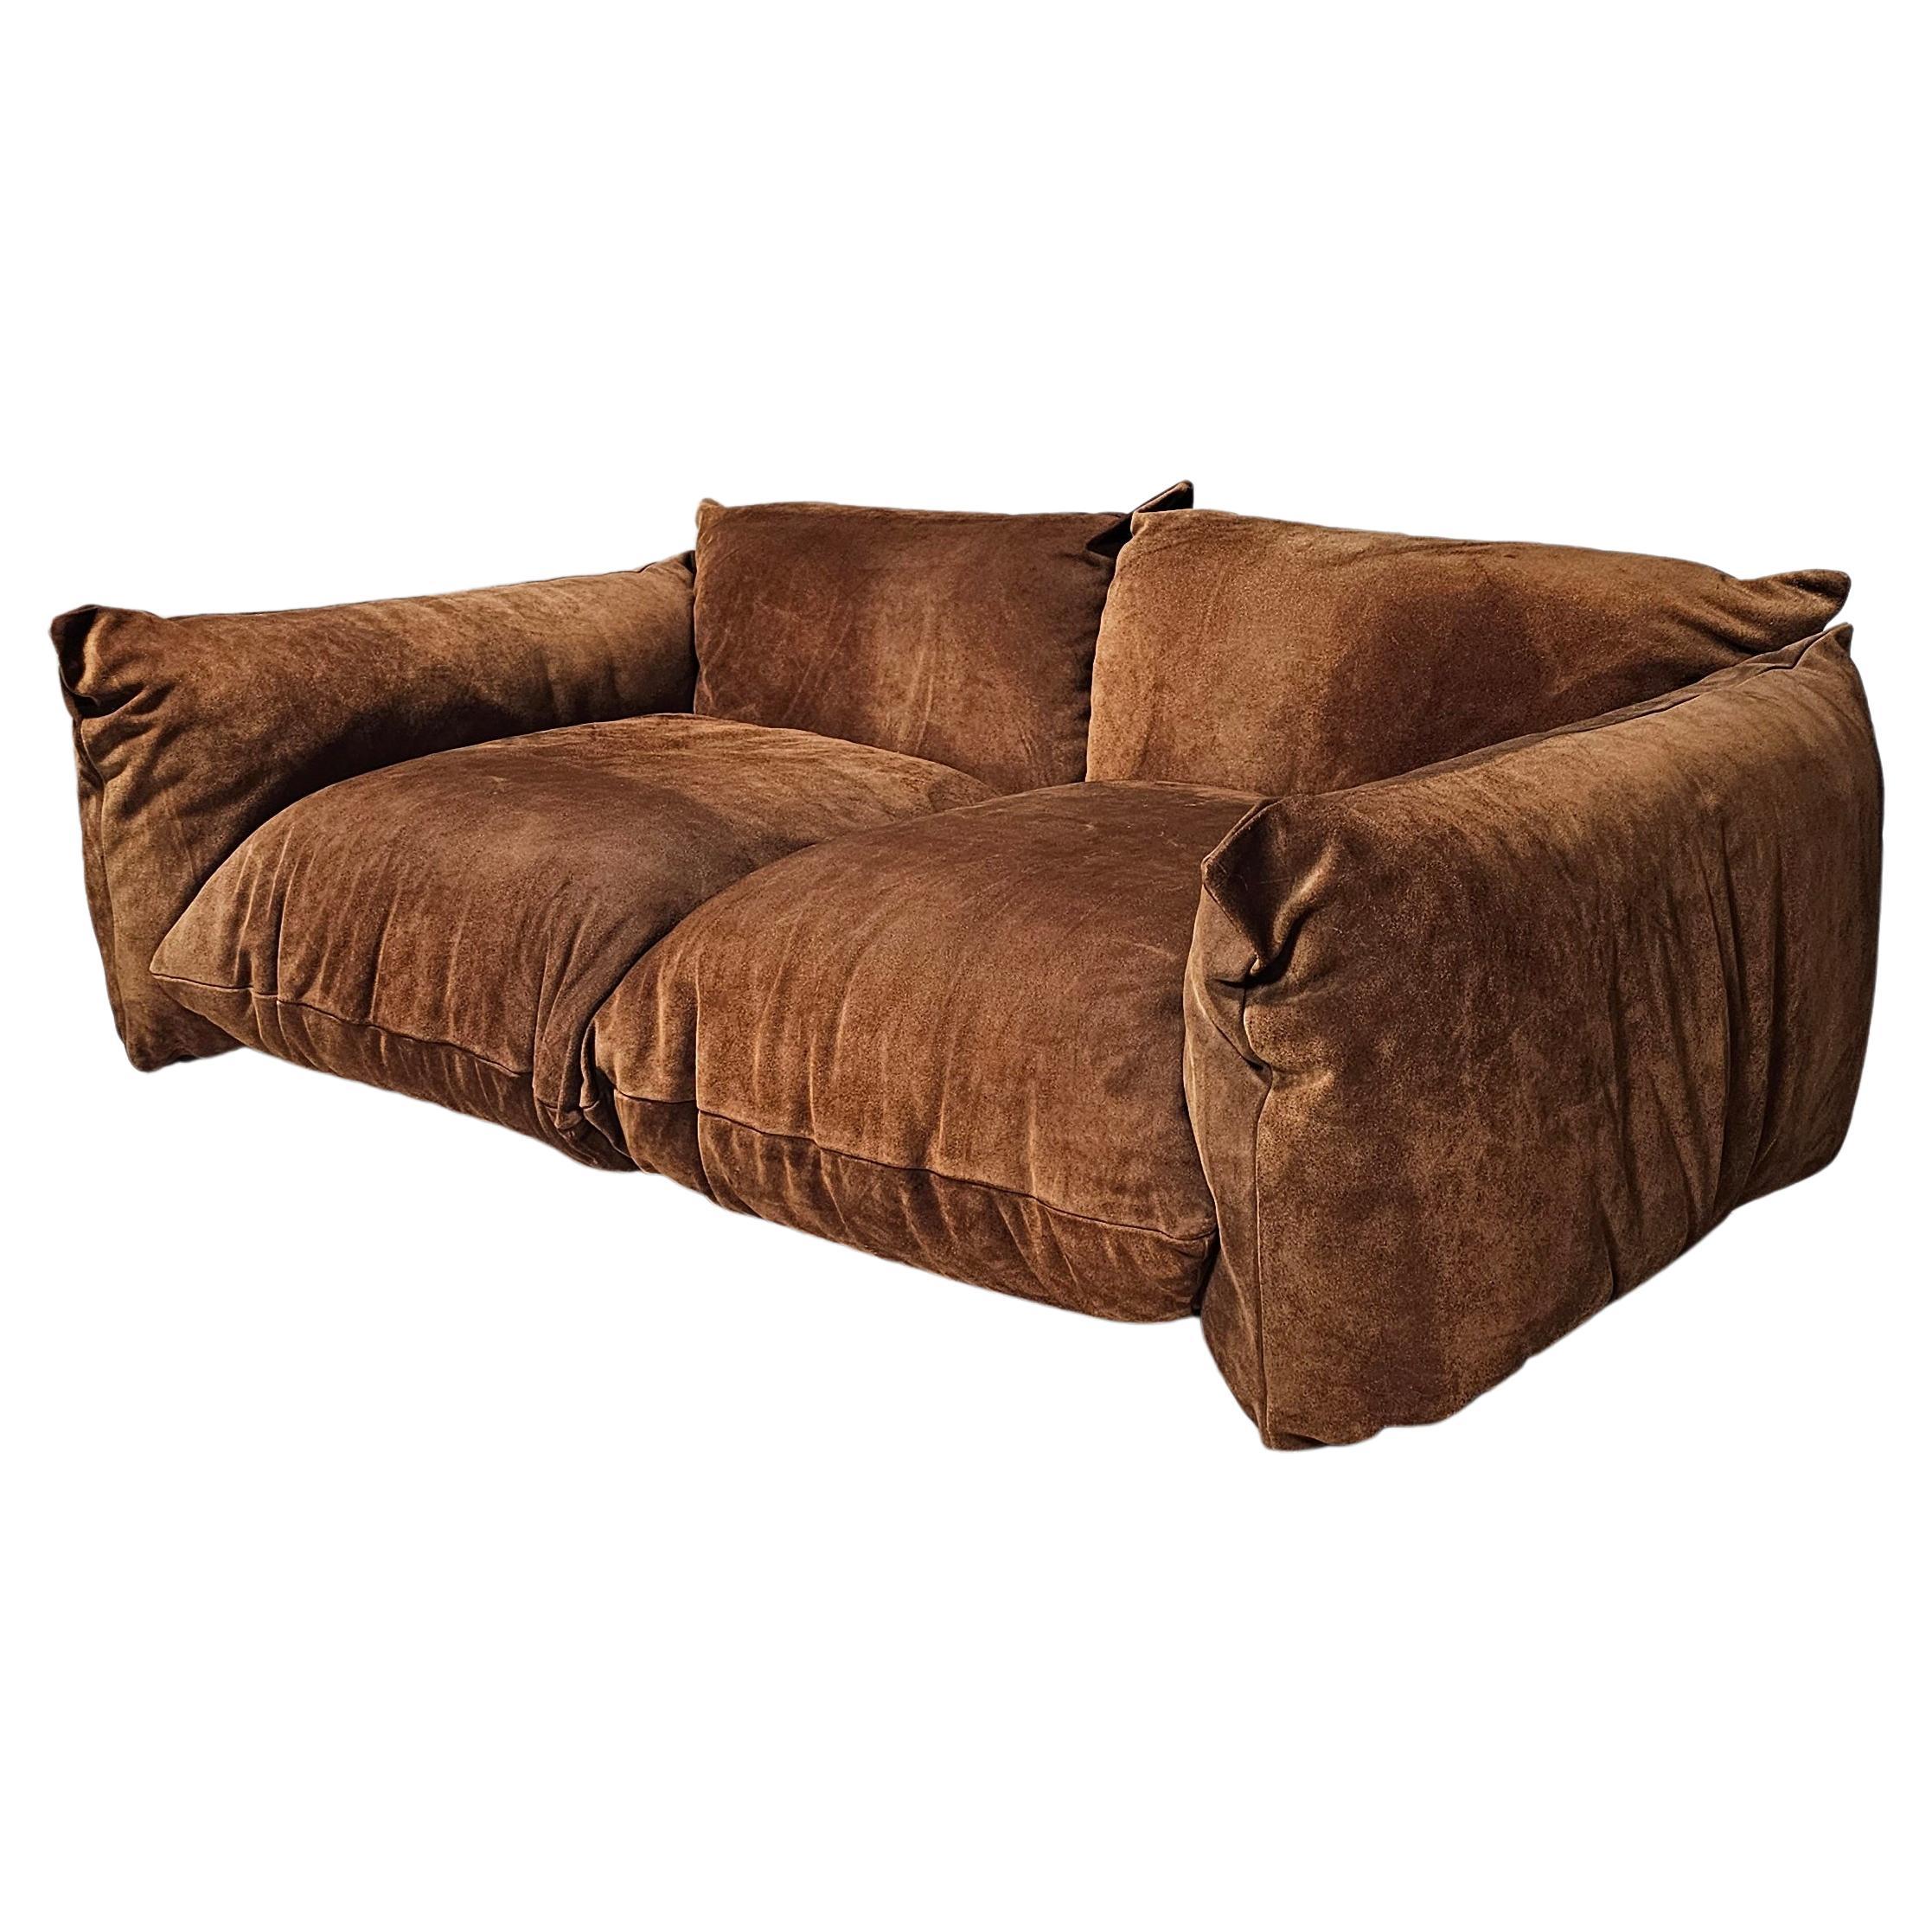 First Edition Mario Marenco 2-seater sofa in light brown suede, Arflex, 1970s